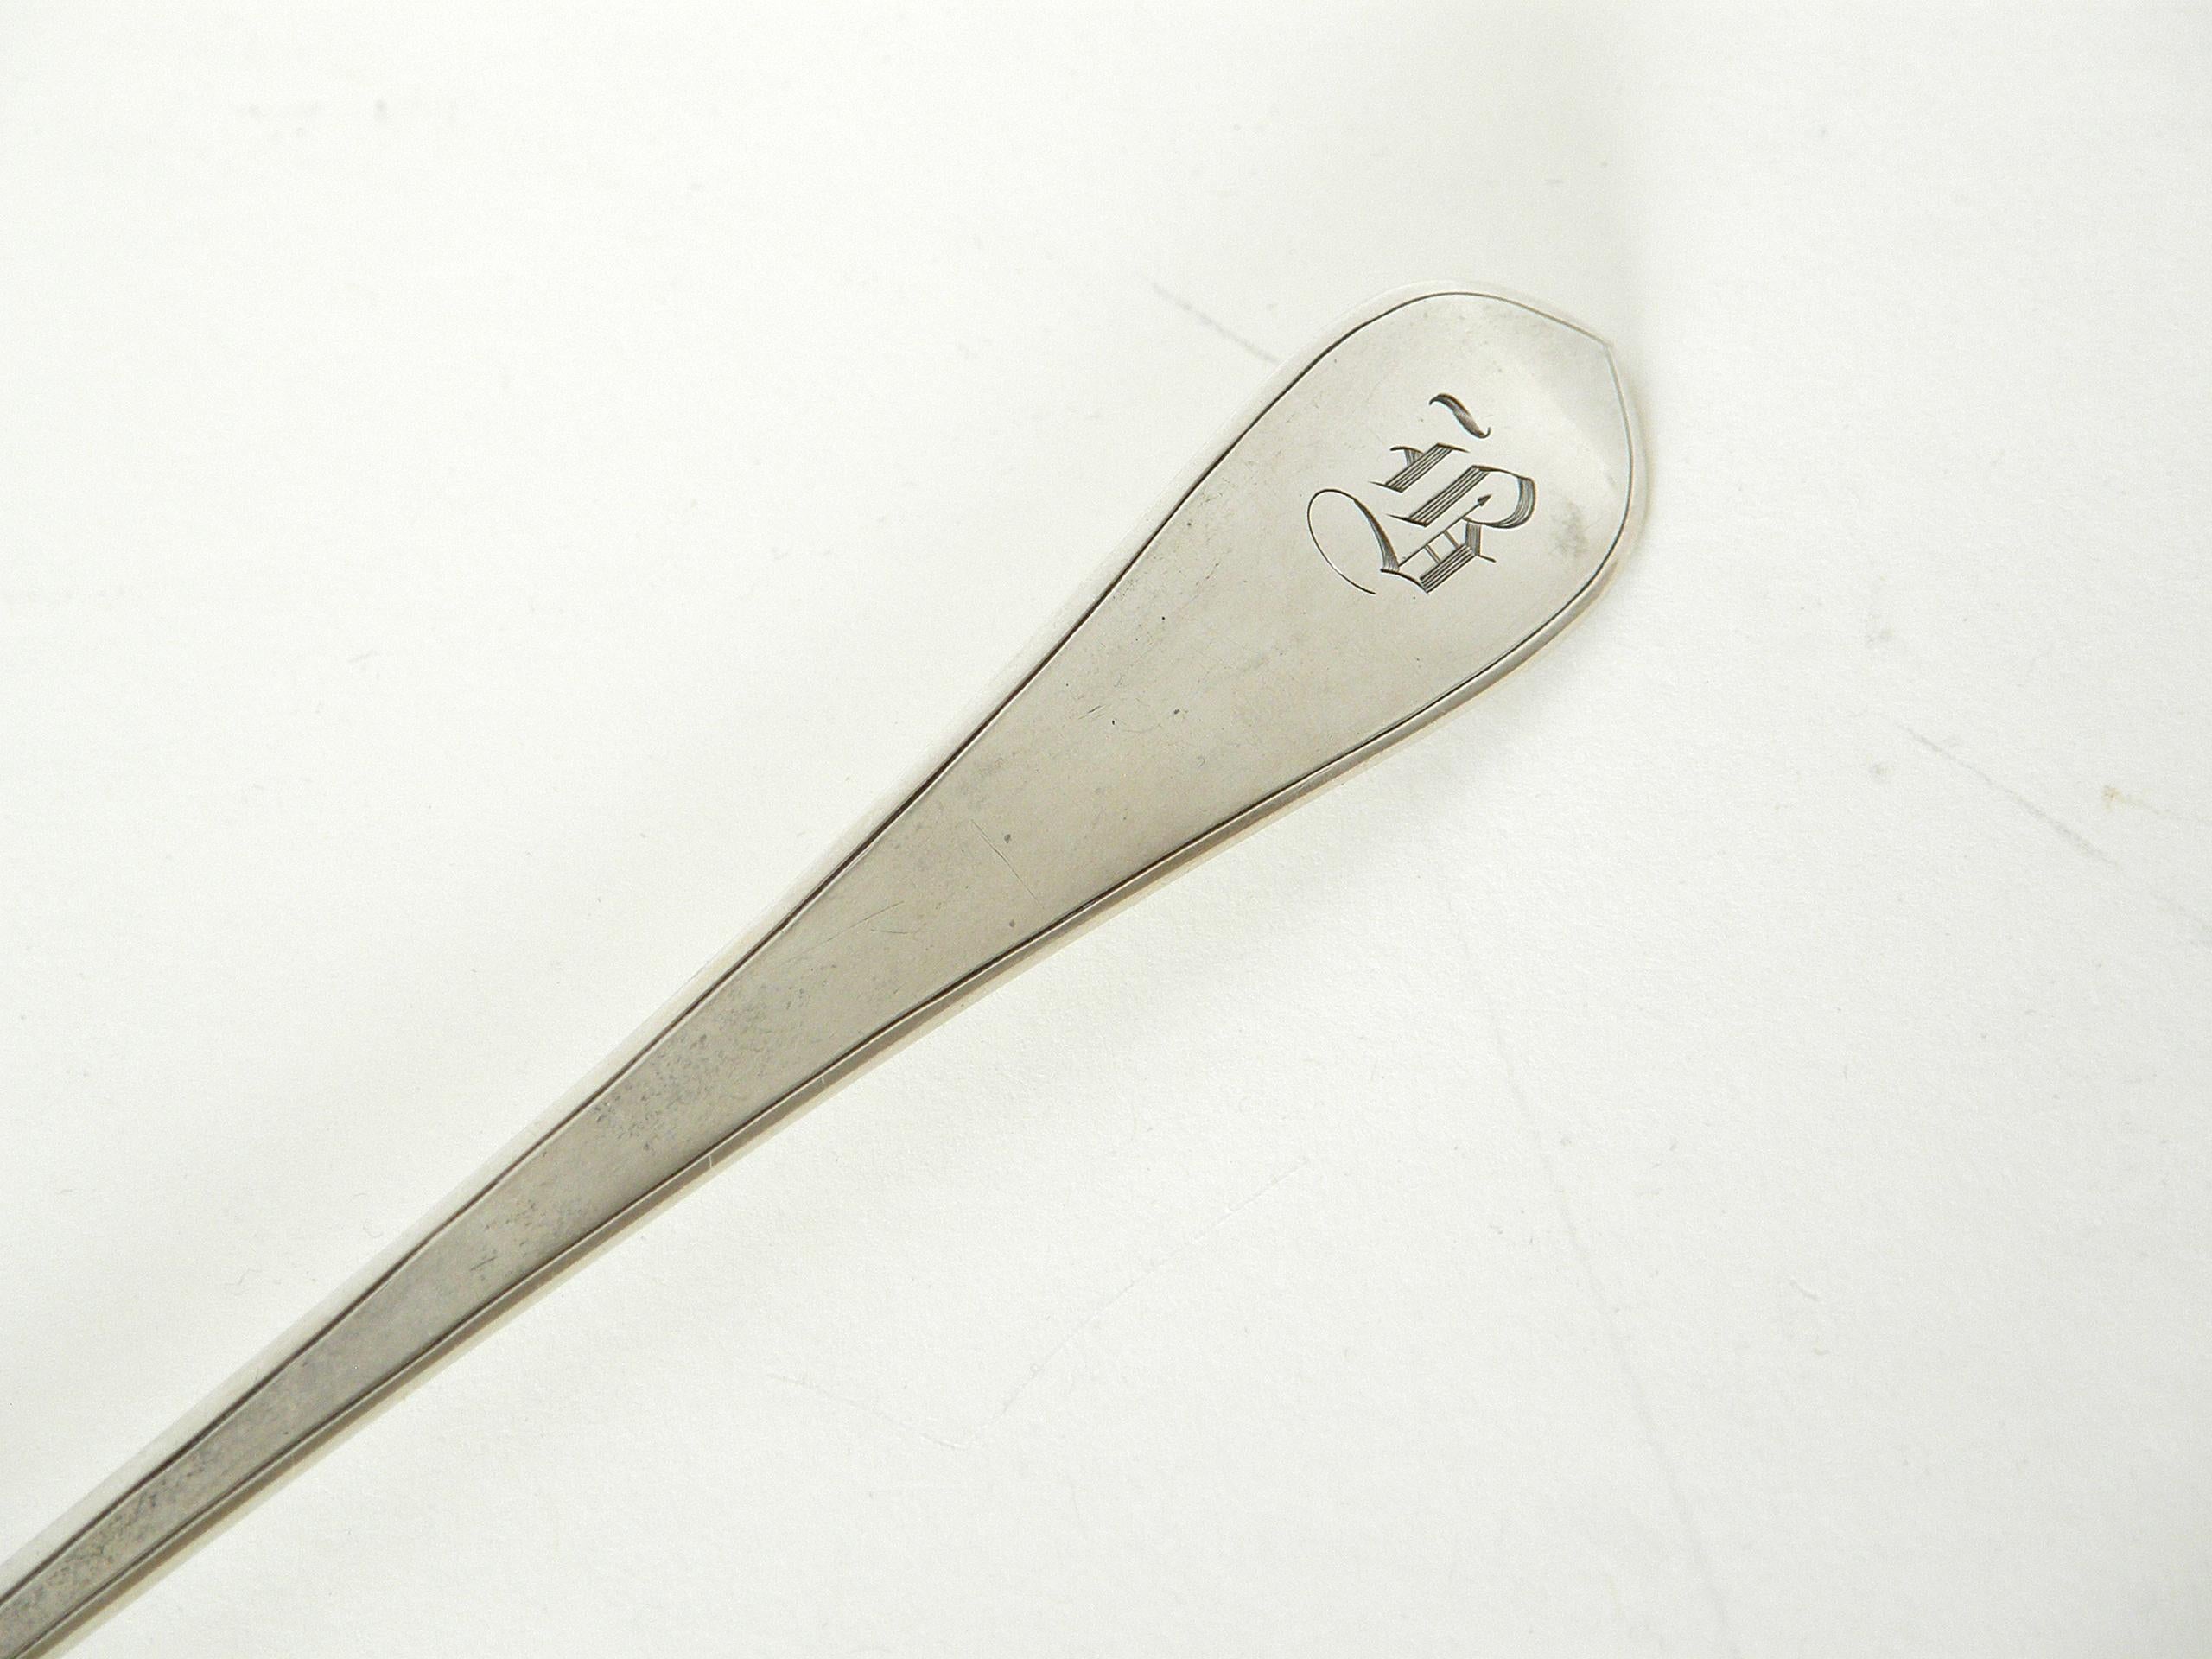 This sterling silver long spoon, claret ladle, or cocktail stirrer was made at the Arthur Stone workshop. It has an elegant line with a teardrop shaped bowl and a handle that tapers to a point. It has an incised line that accents the handle edges